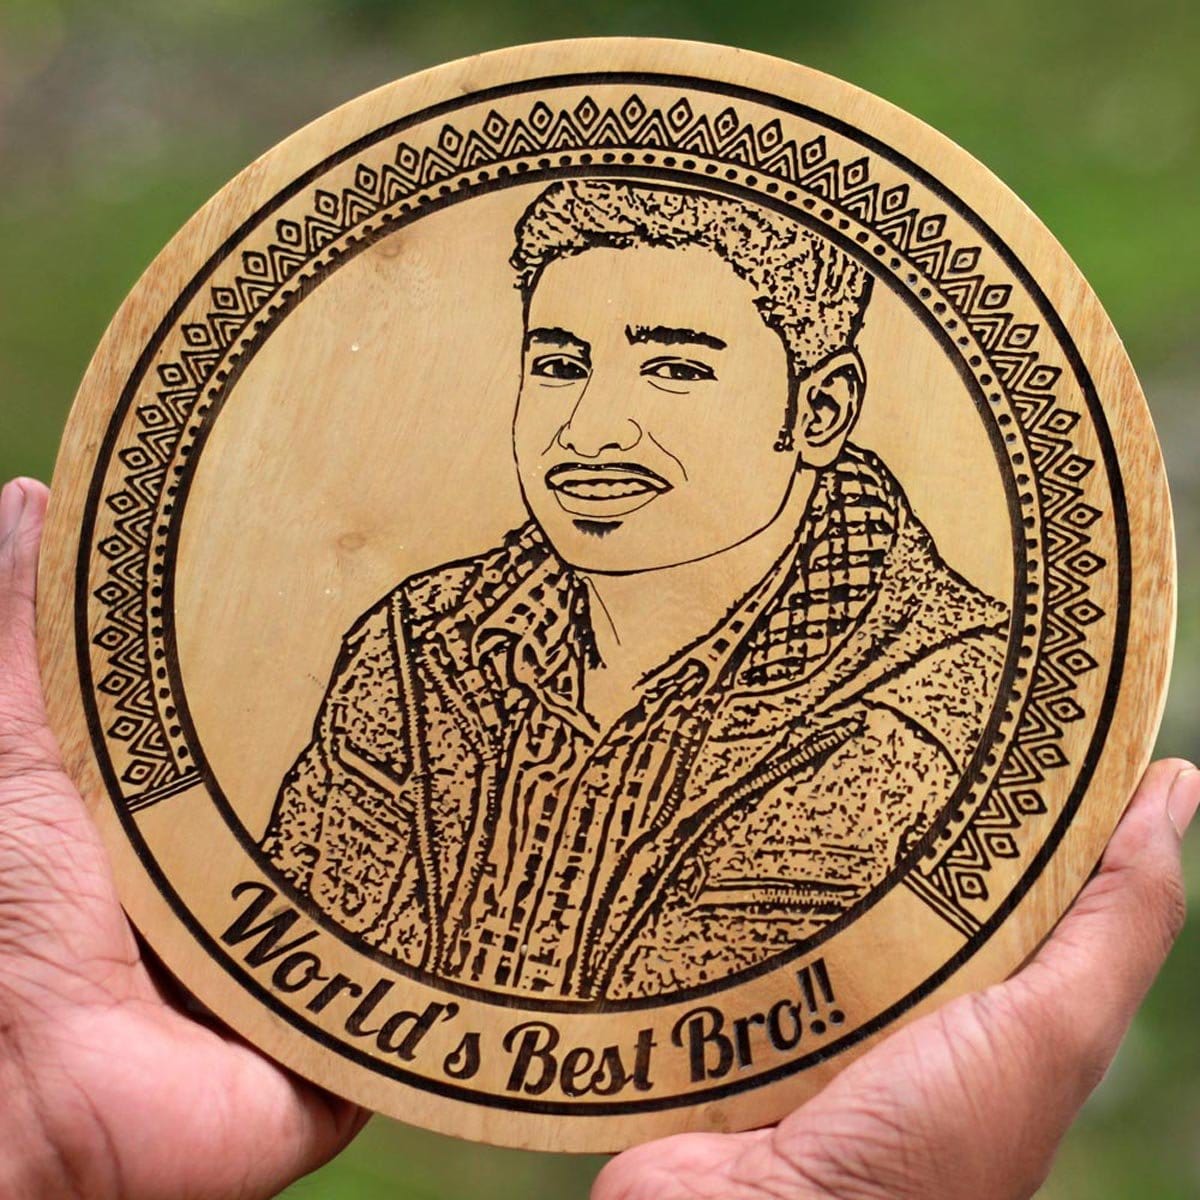 World's Best Bro Wood Engraved Photo. This photo engraved wooden frame is the best photo gift for brother. Looking for Rakhi gifts or birthday gifts for brother? This wooden poster is perfect.